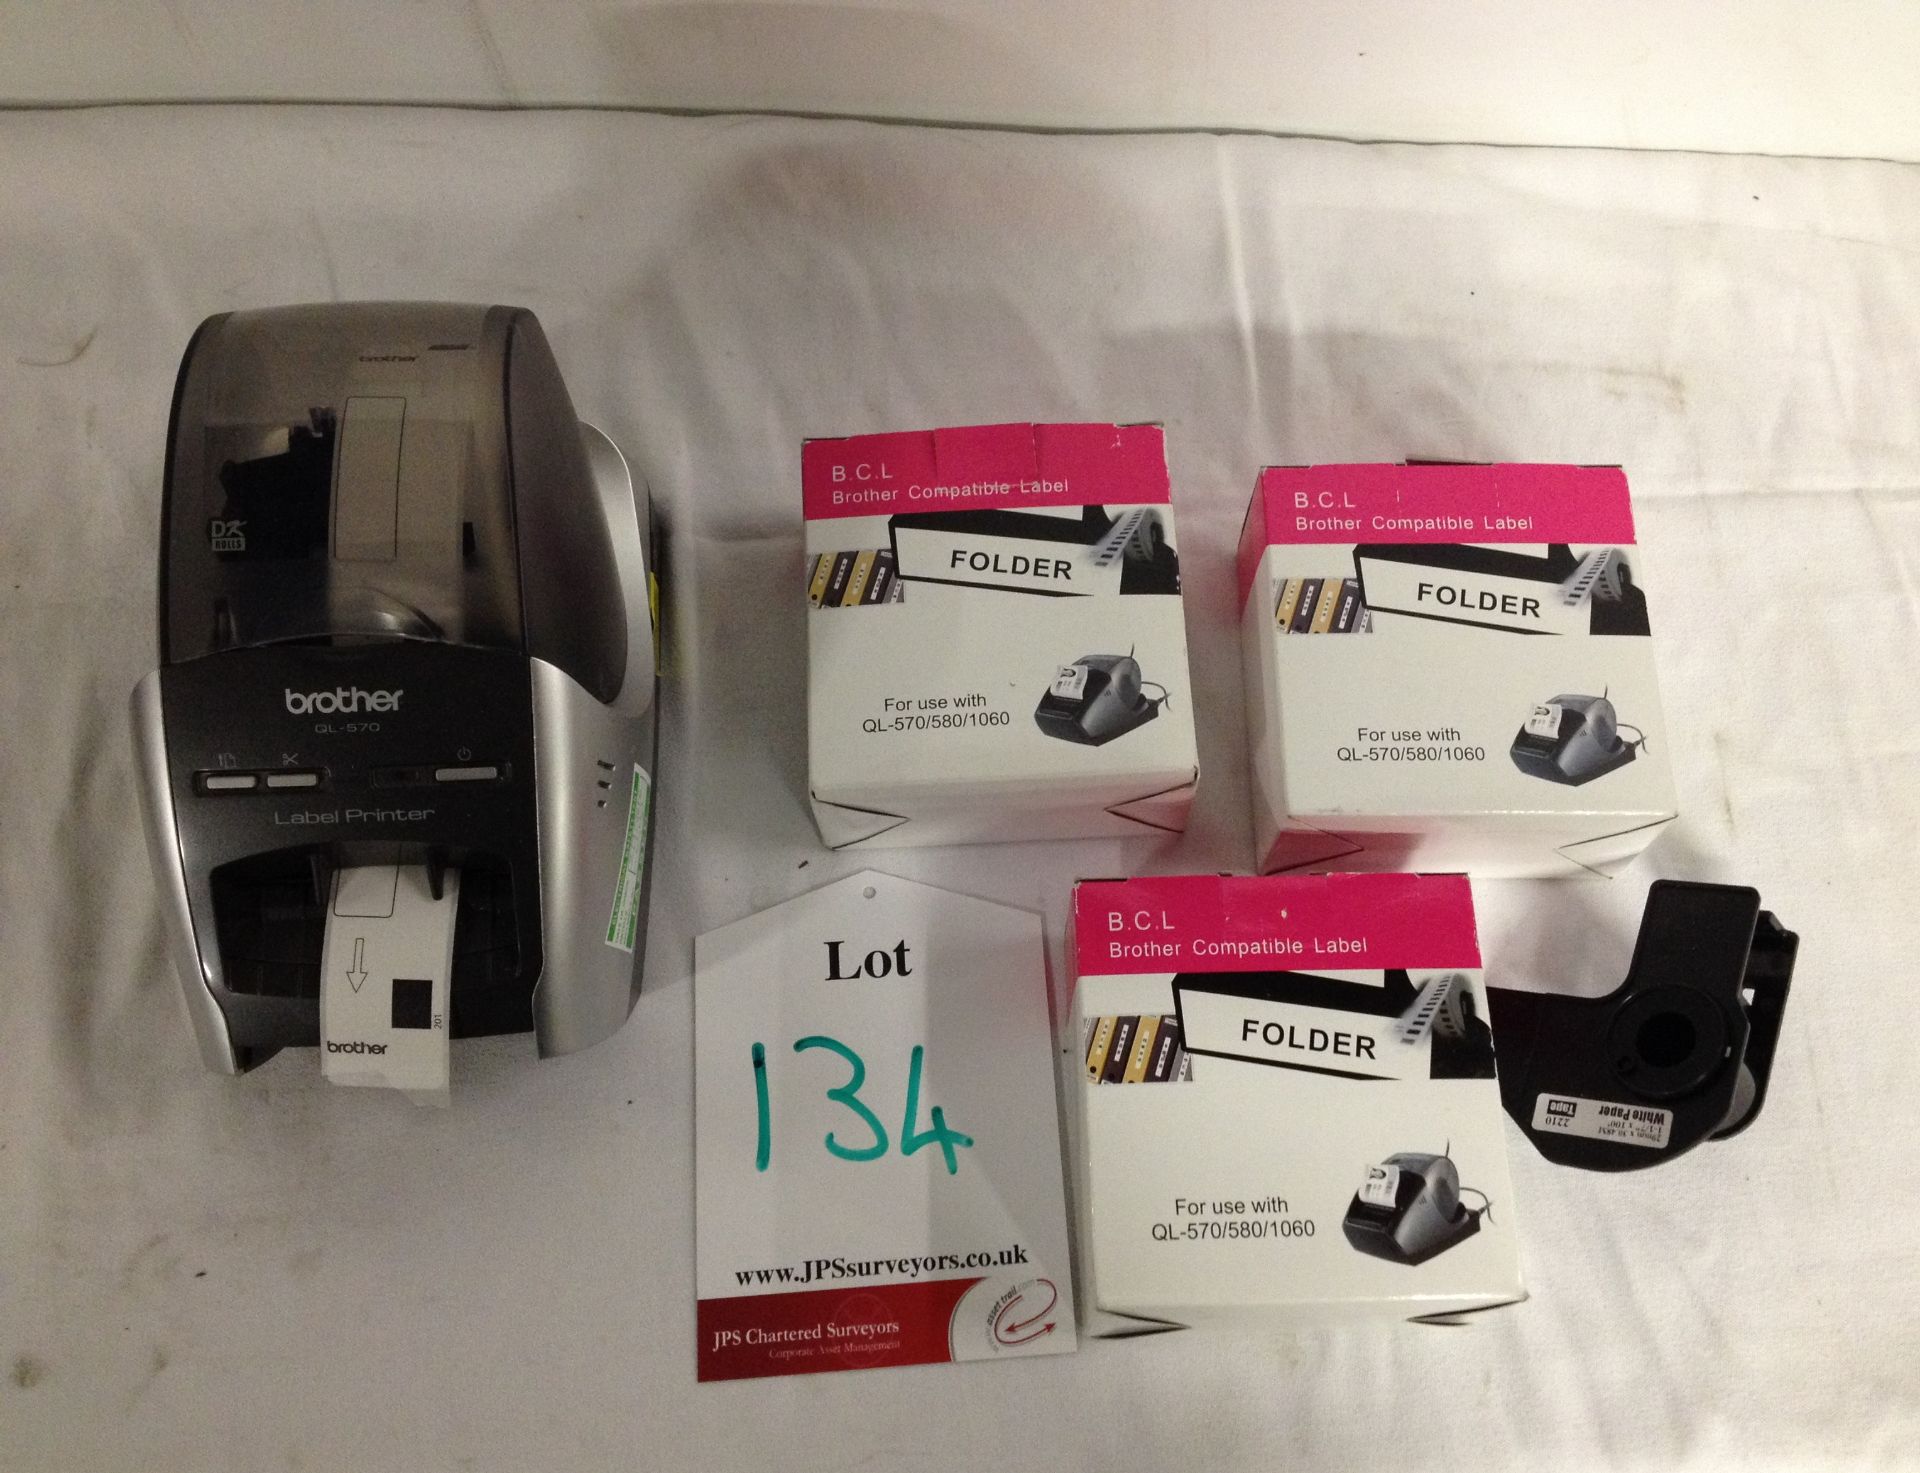 Brother Label Printer and 3x B.C.L, Brother Compat